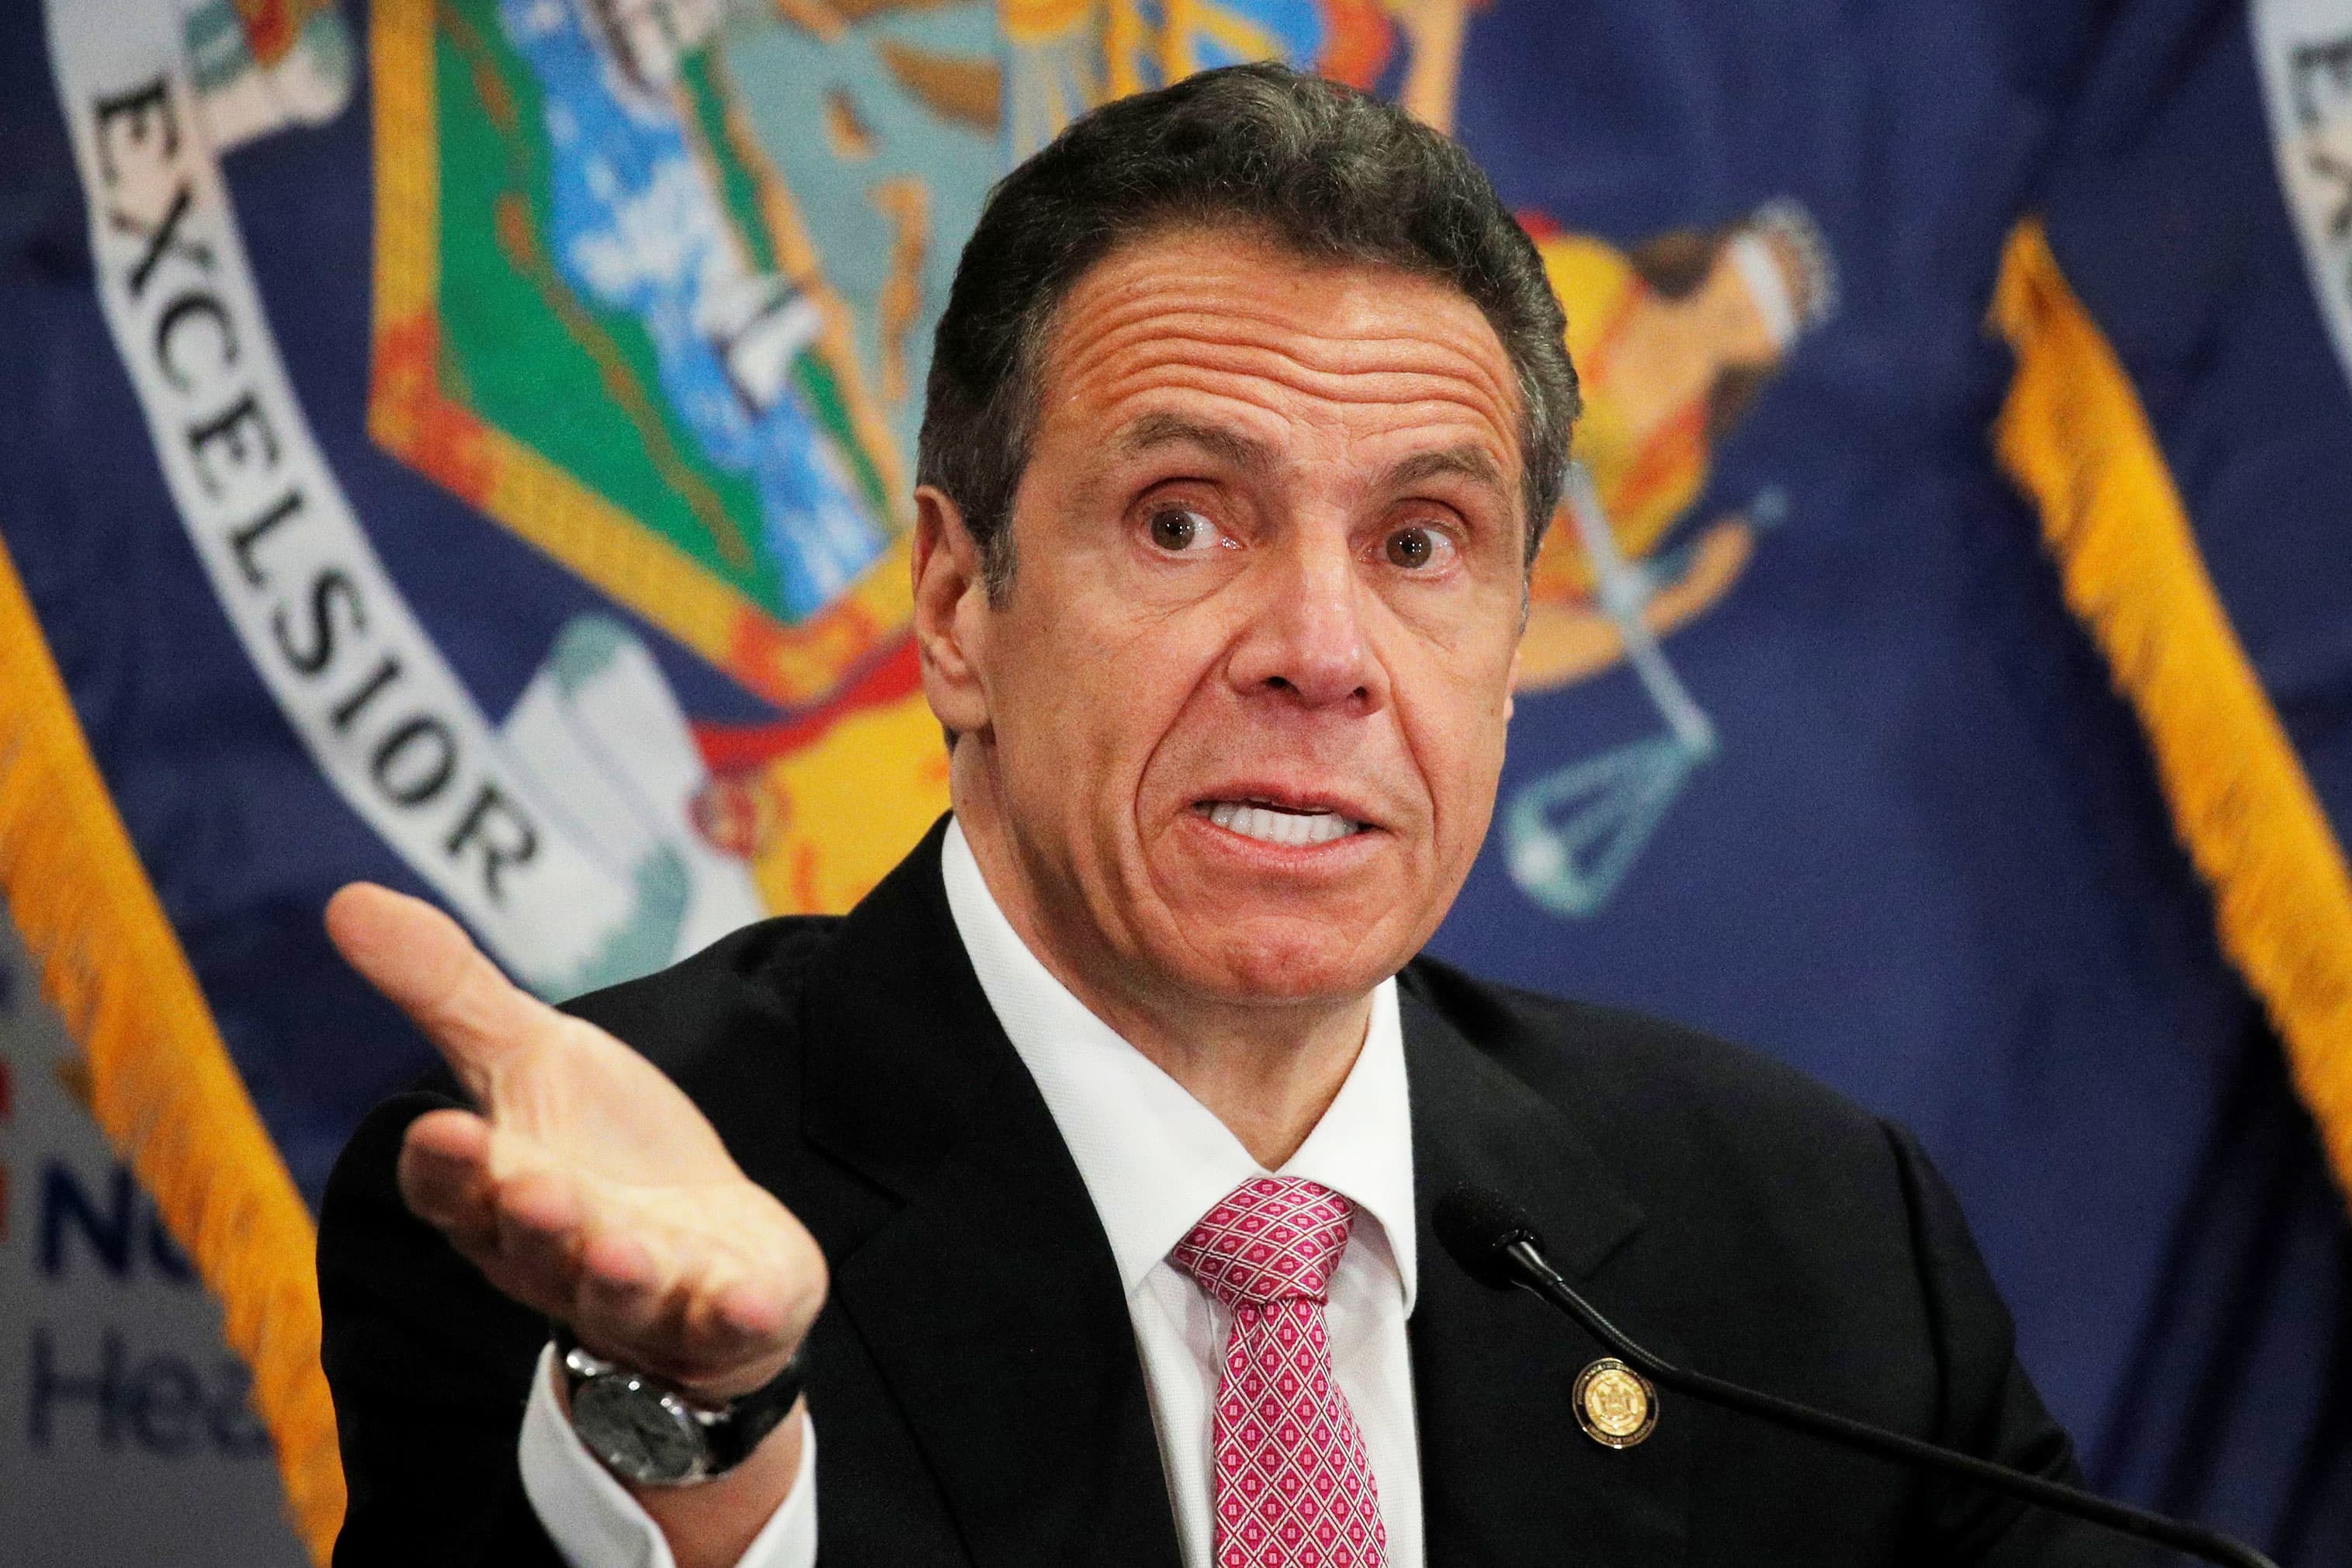 Sheriff says former Cuomo staffer filed criminal complaint against governor, according to report